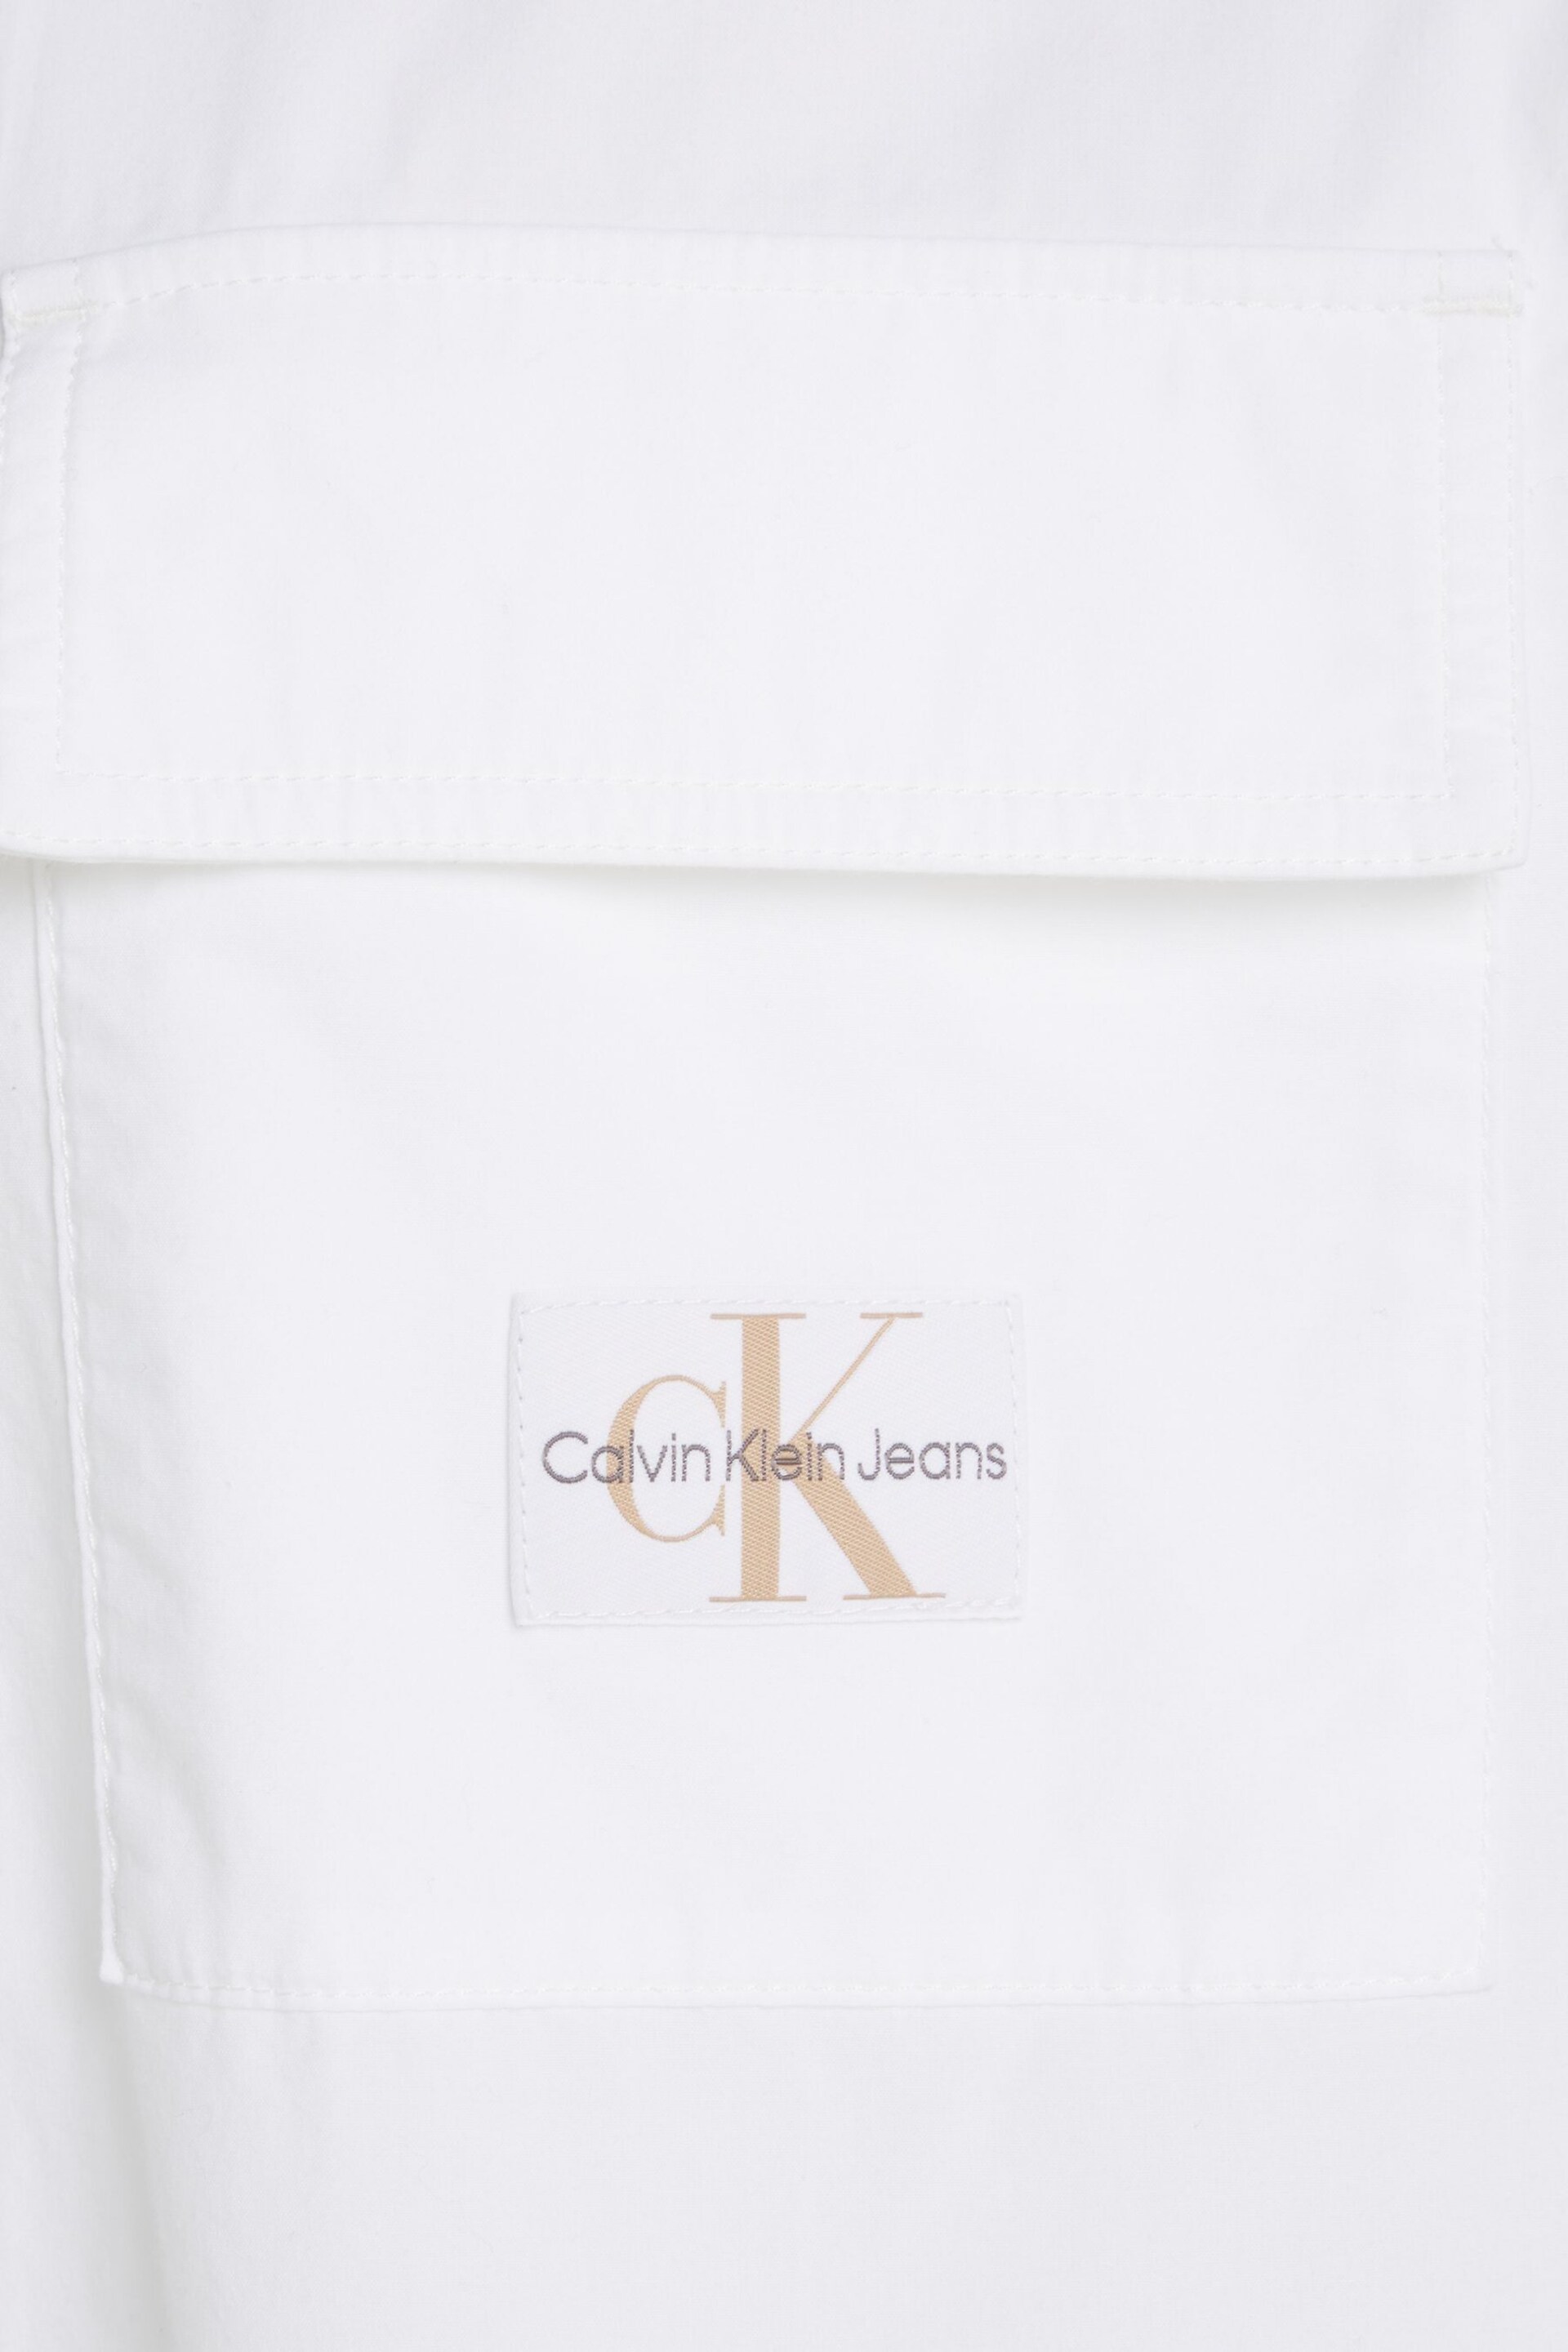 Calvin Klein Jeans Cotton Utility Long-Sleeved White Shirt - Image 6 of 7